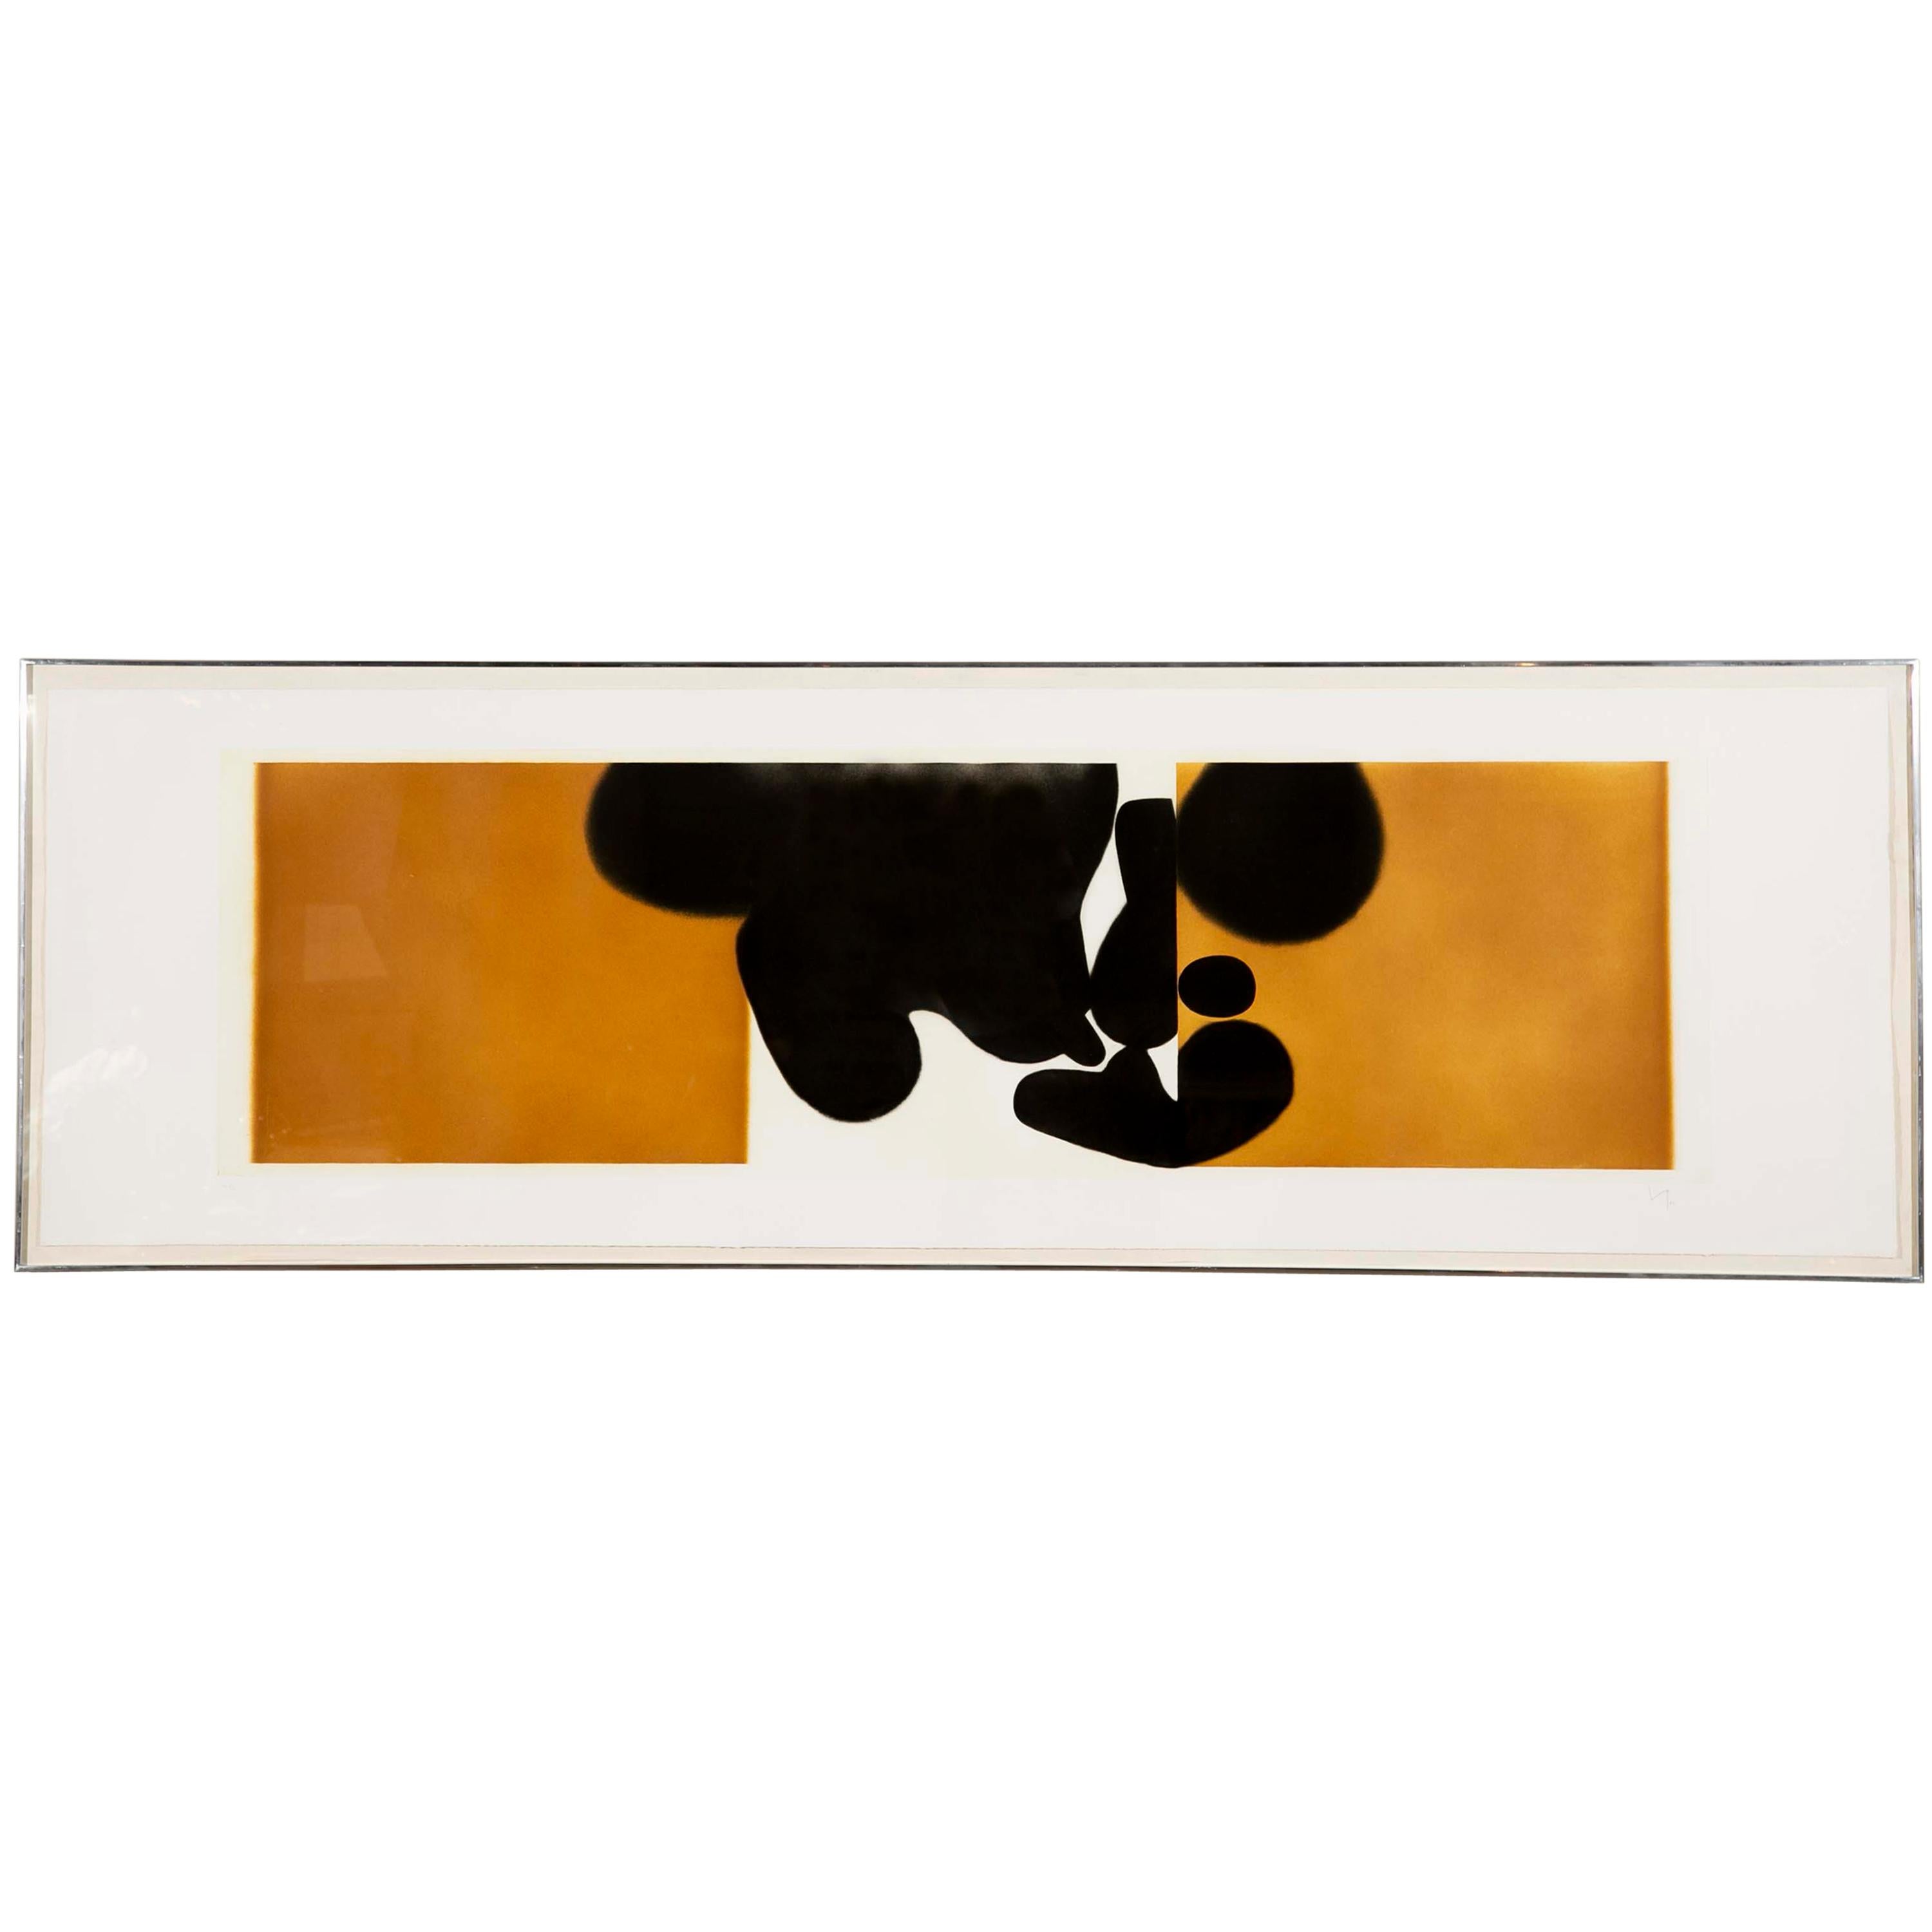 "Punto Di Cantatto 4" Color Etching and Aquatint by Victor Pasmore